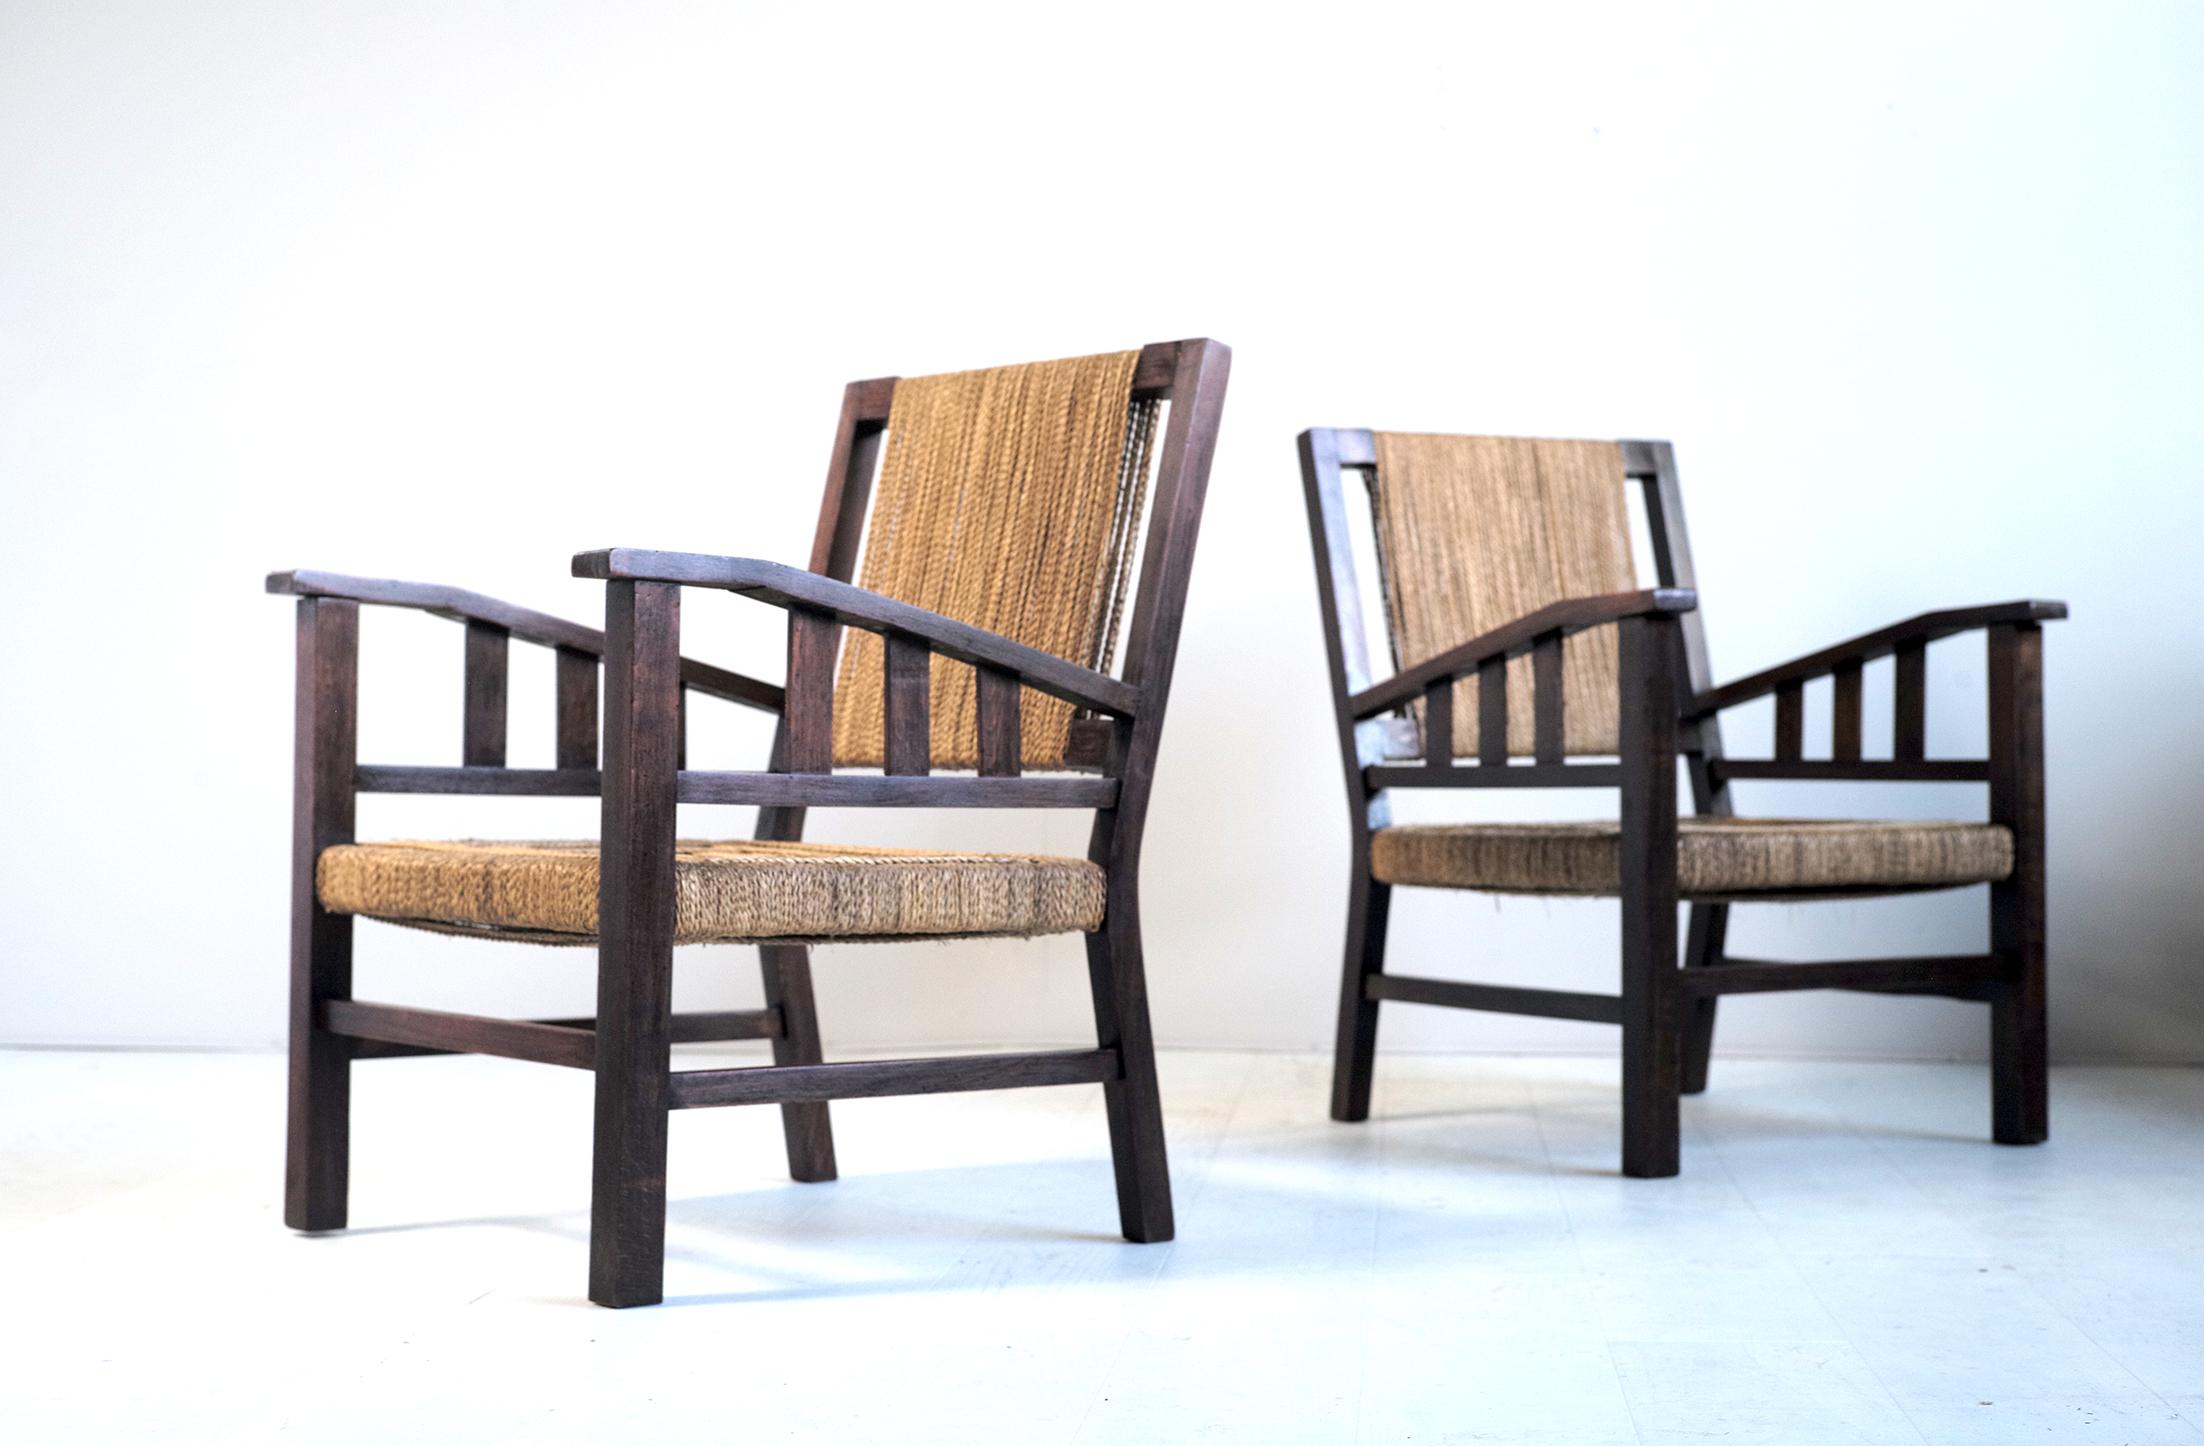 Francis Jourdain (1876-1958), pair of Minimalist armchairs, France 1930.
Structure in oiled oak, openwork armrests, spacer stand, original trim in braided ropes.